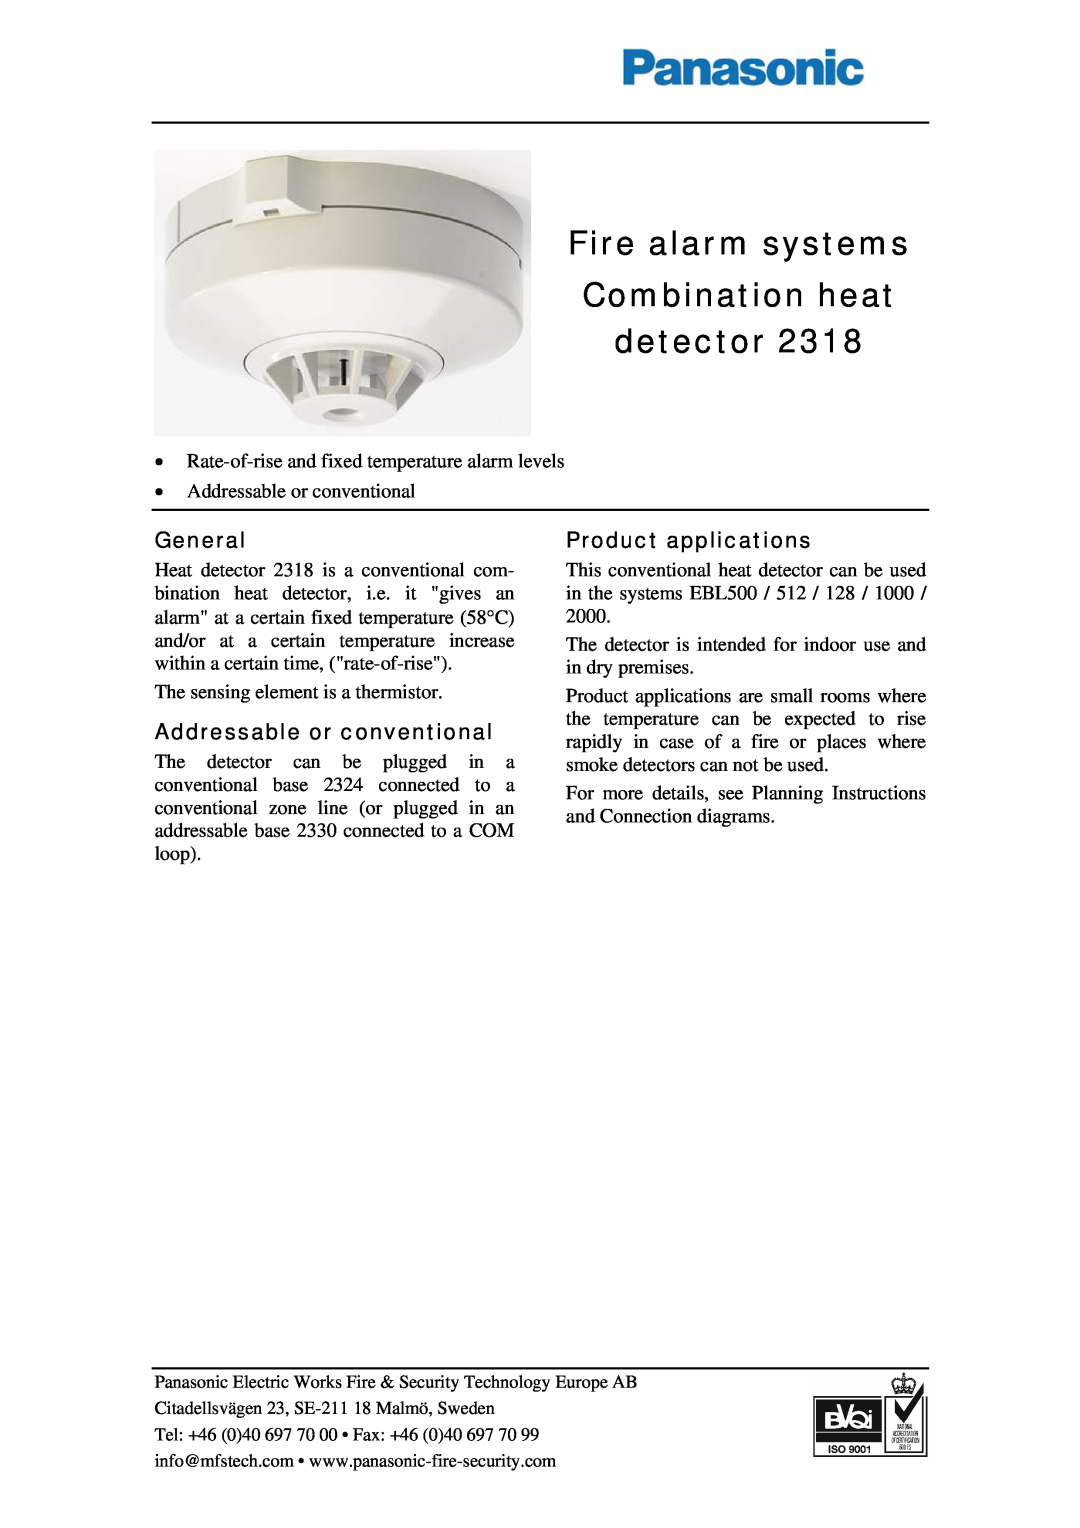 Panasonic 2318 manual Fire alarm systems Combination heat detector, General, Addressable or conventional 